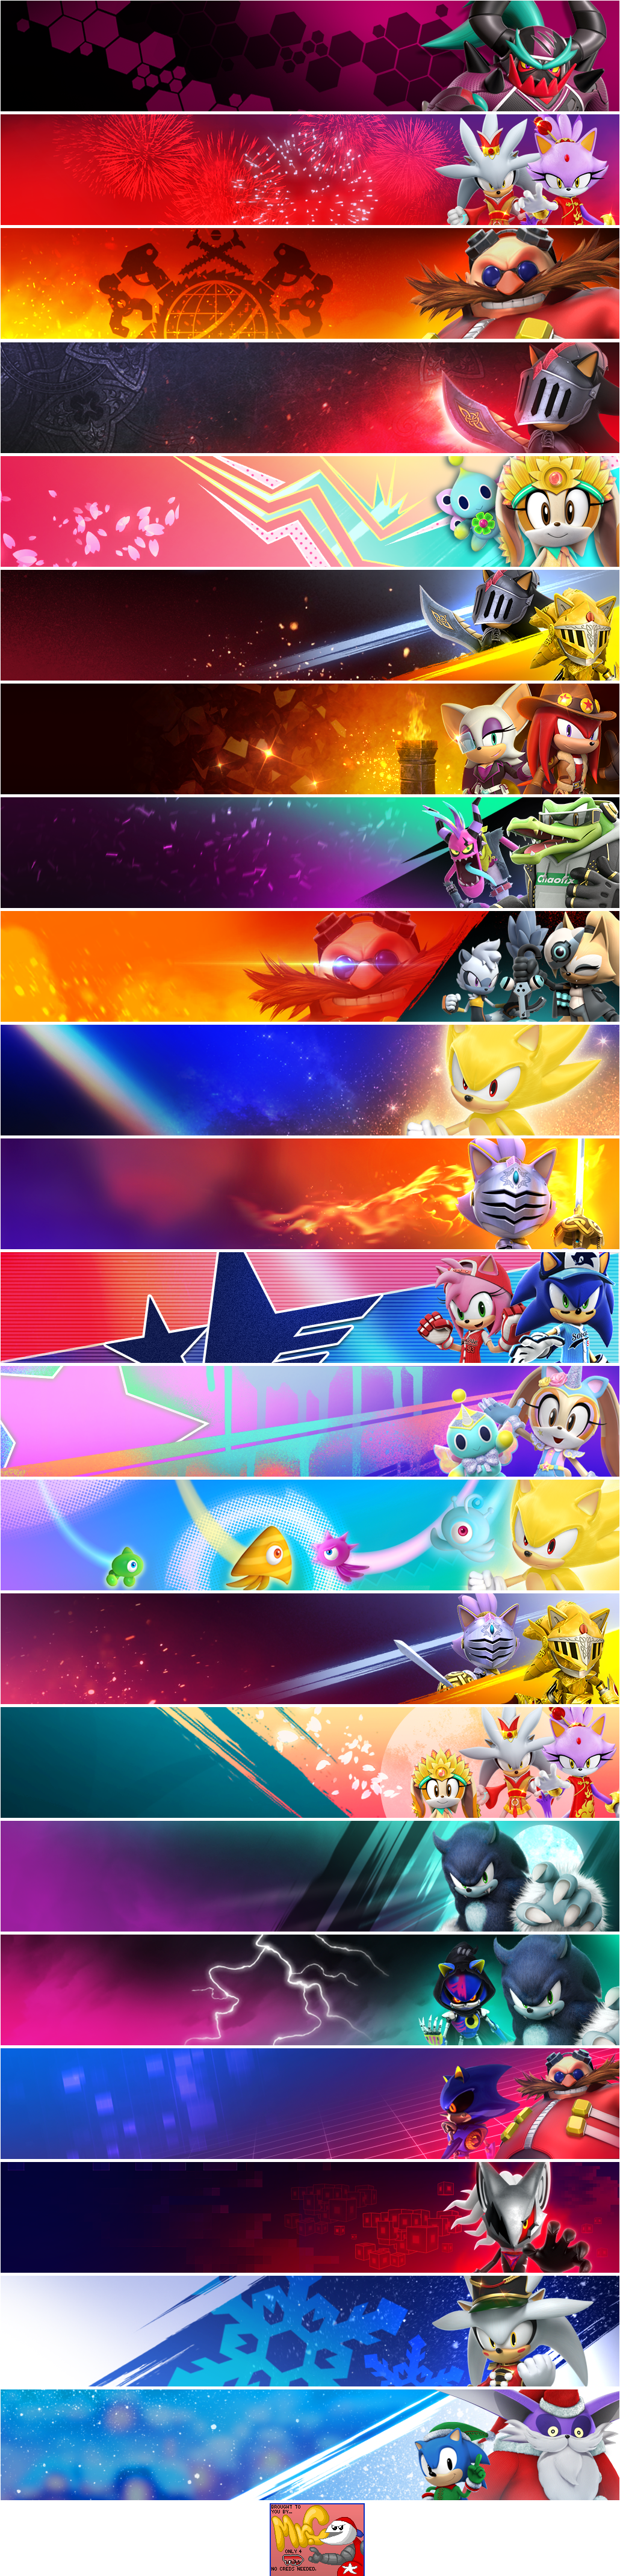 Event Banners (2021)